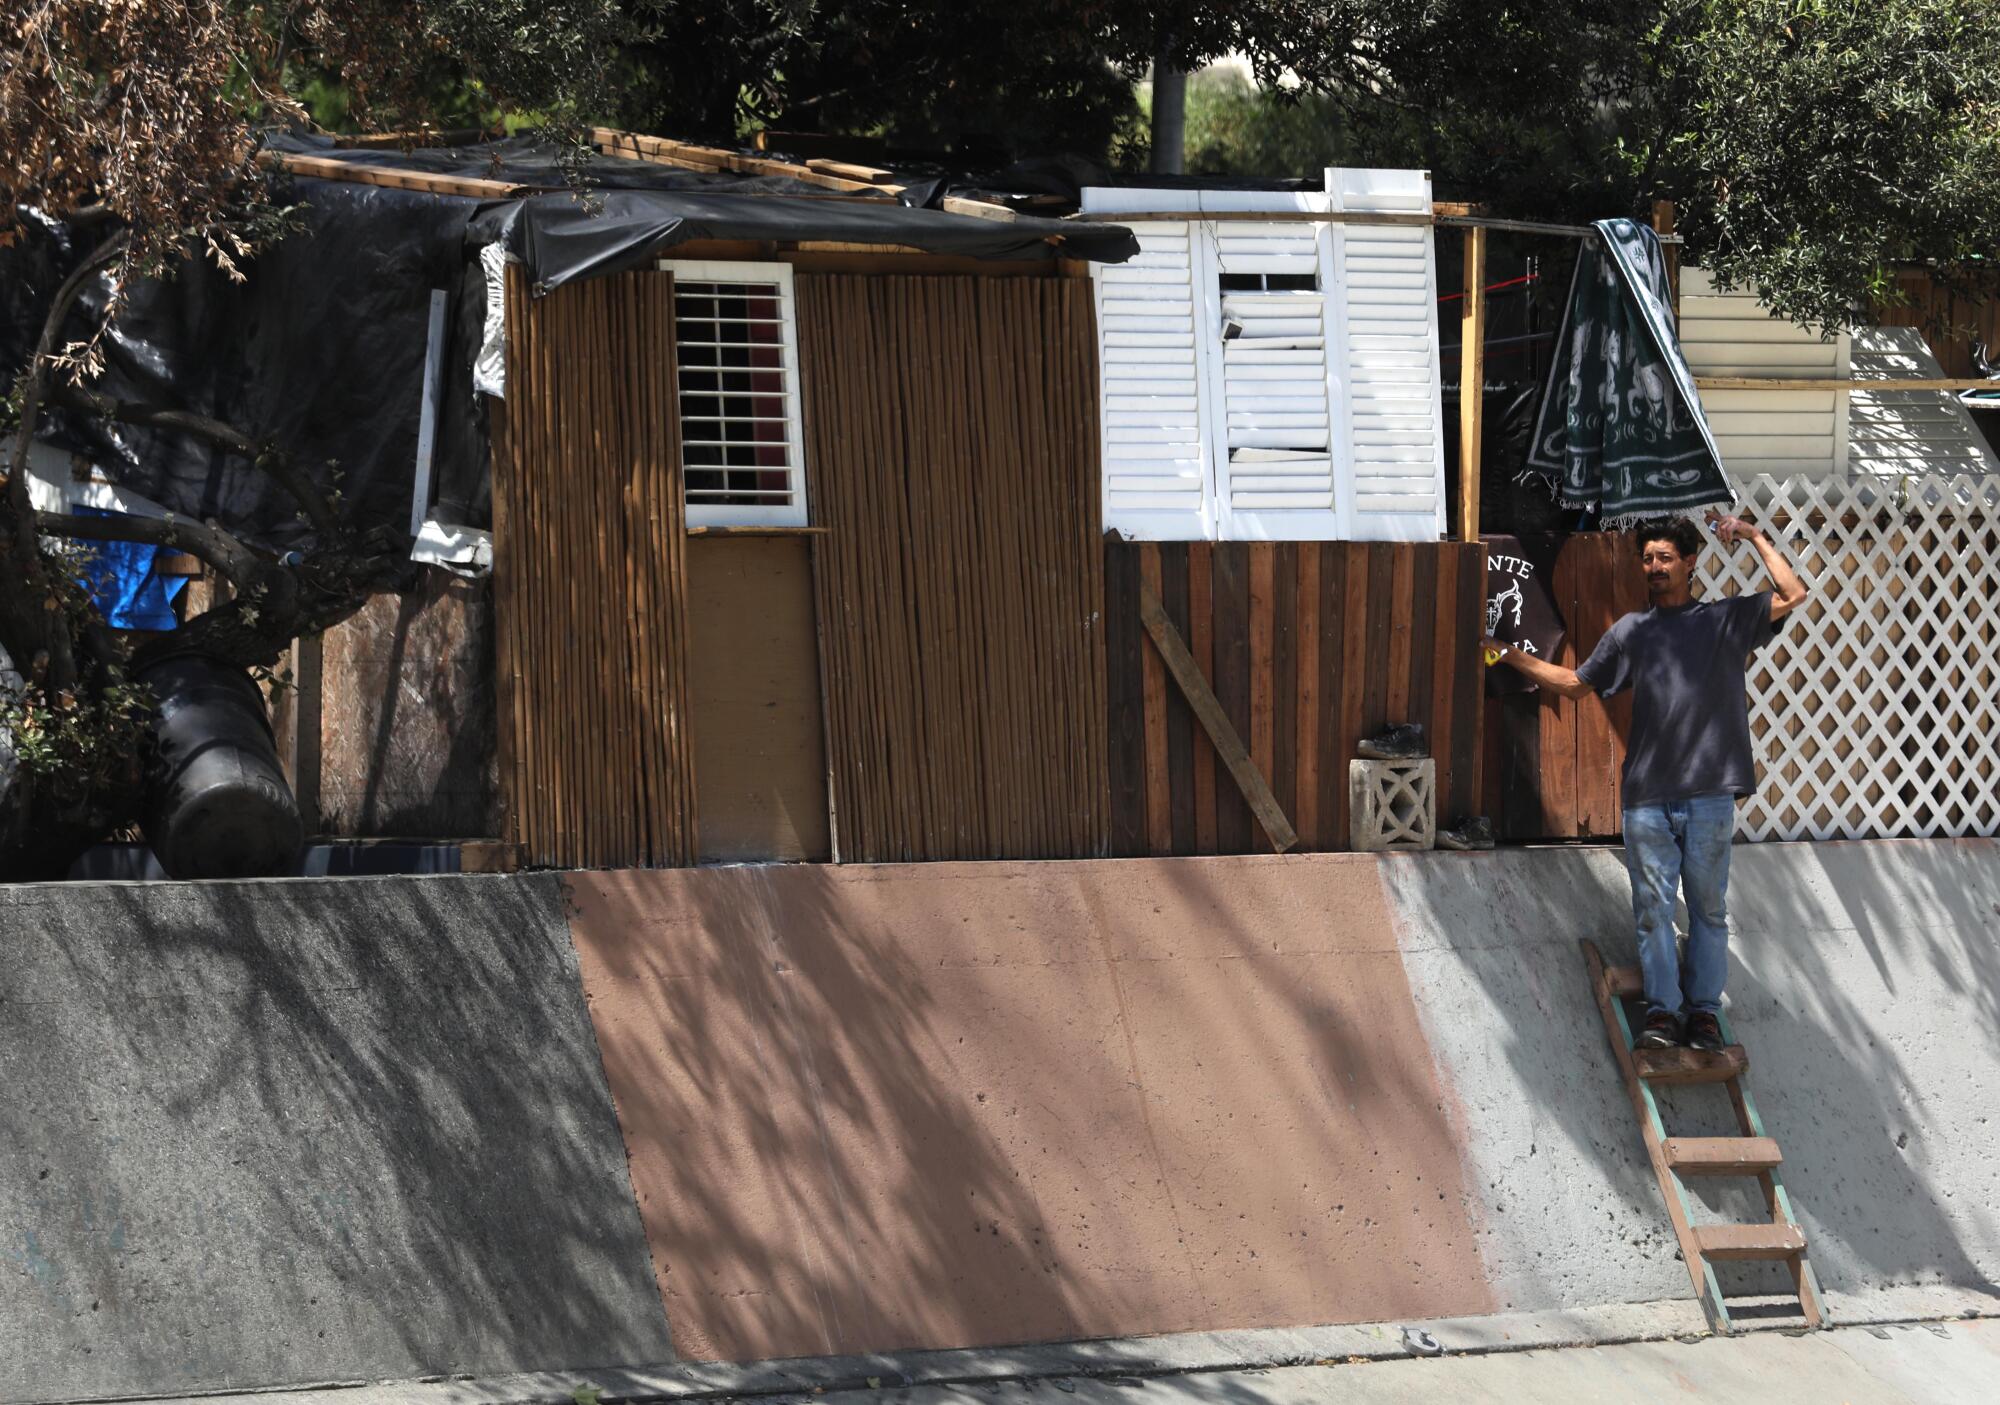 Cesar Augusto stands in front of his home. He arrived in Los Angeles roughly 20 years ago from Guatemala. 